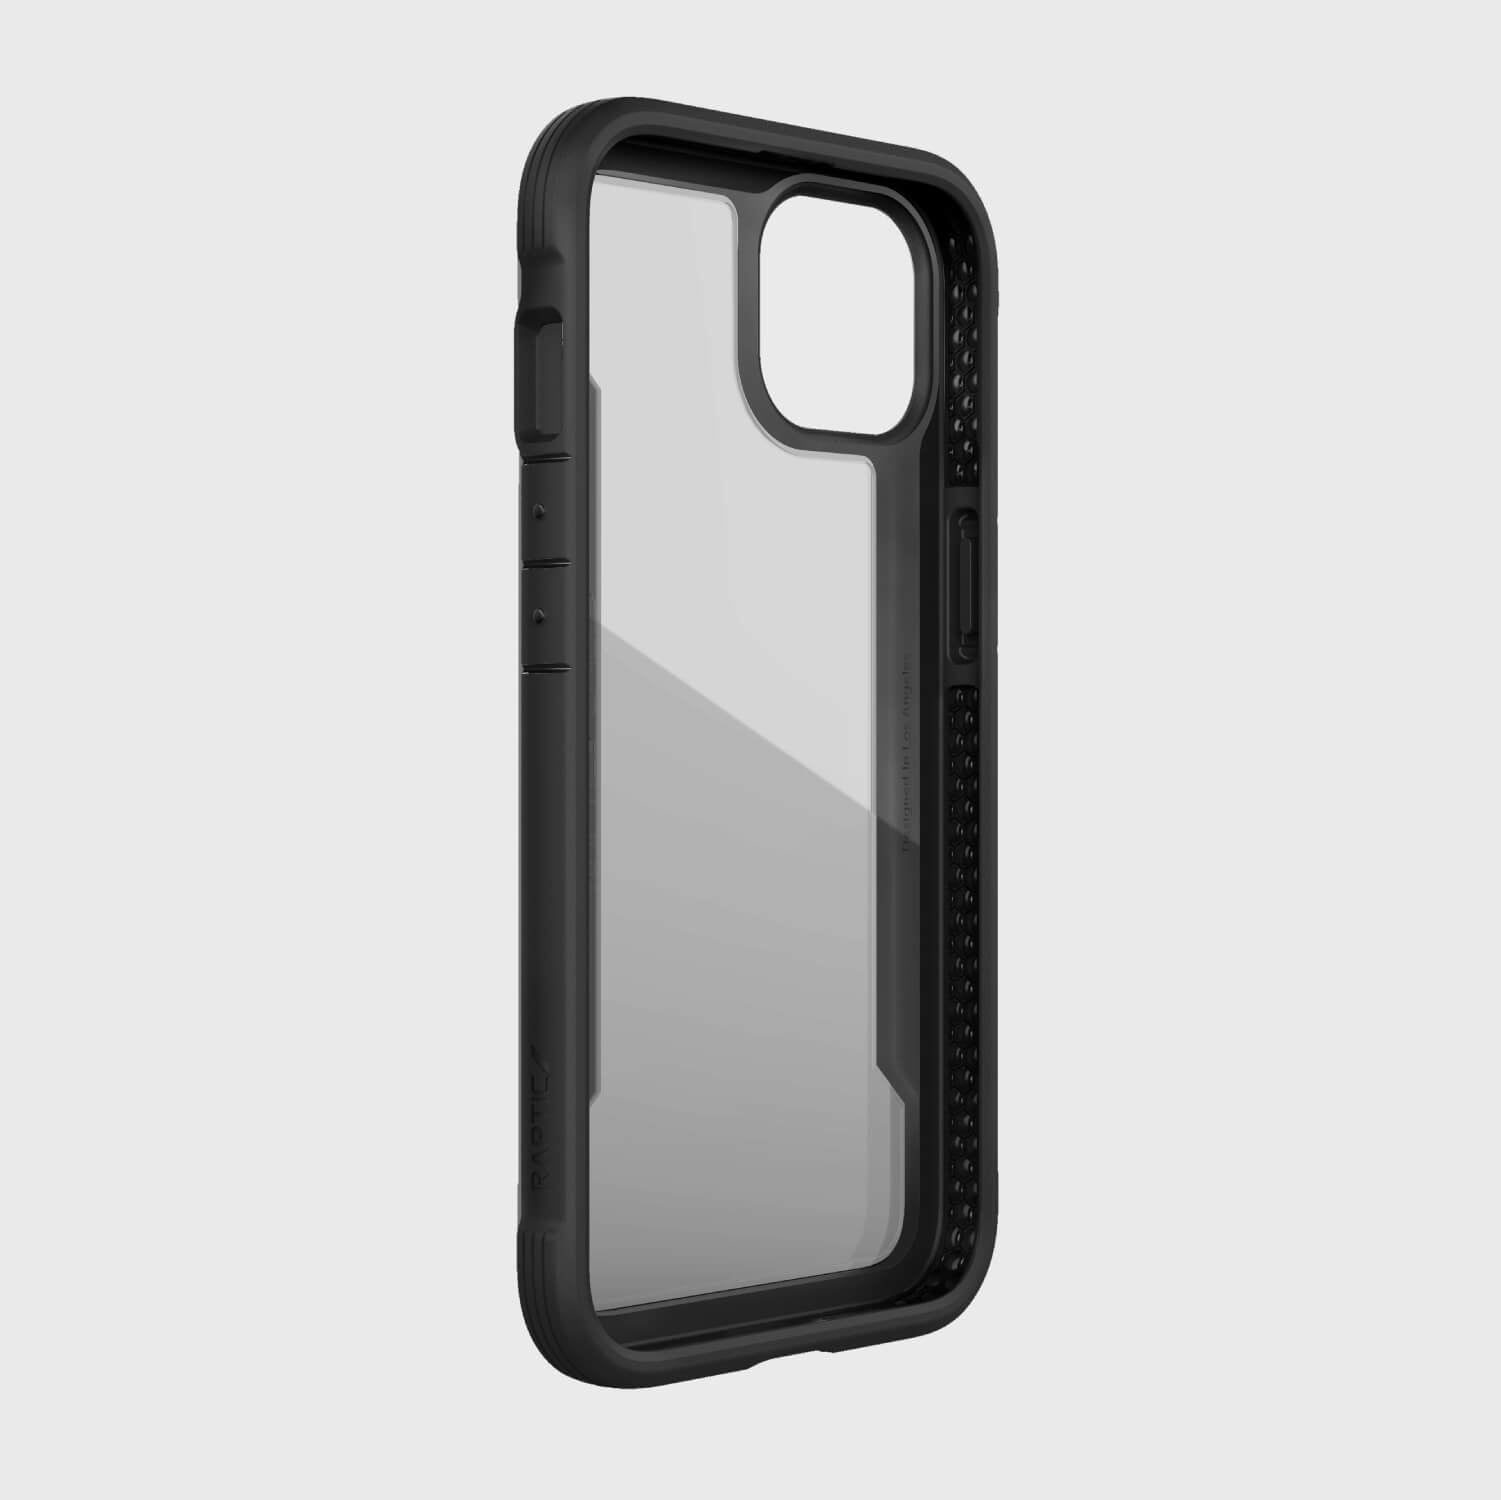 Raptic iPhone 13 Case - SHIELD PRO, offering drop protection.